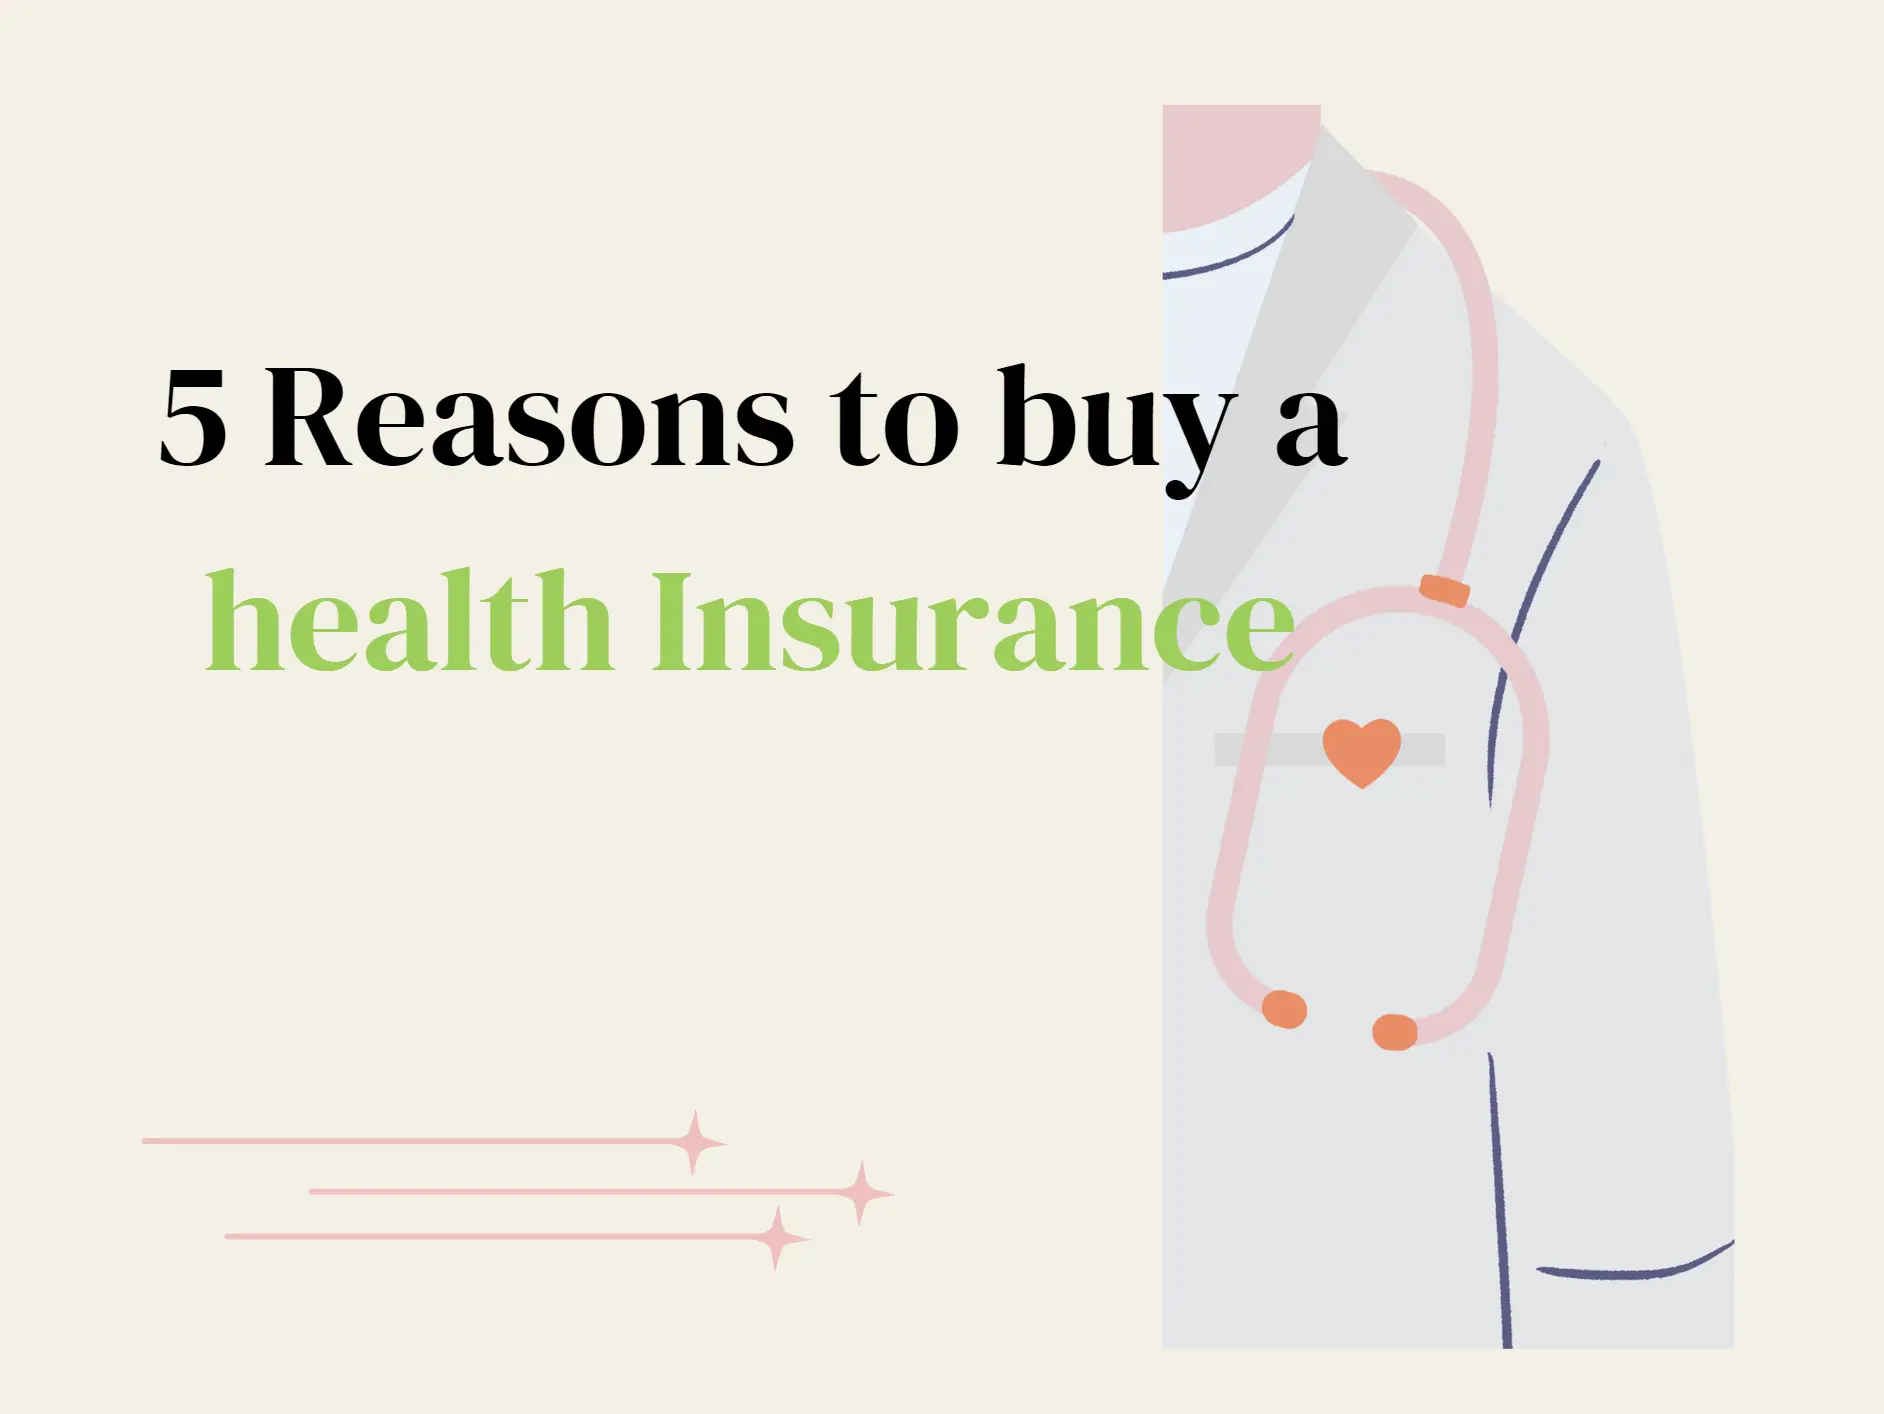 Reasons to buy a health insurance